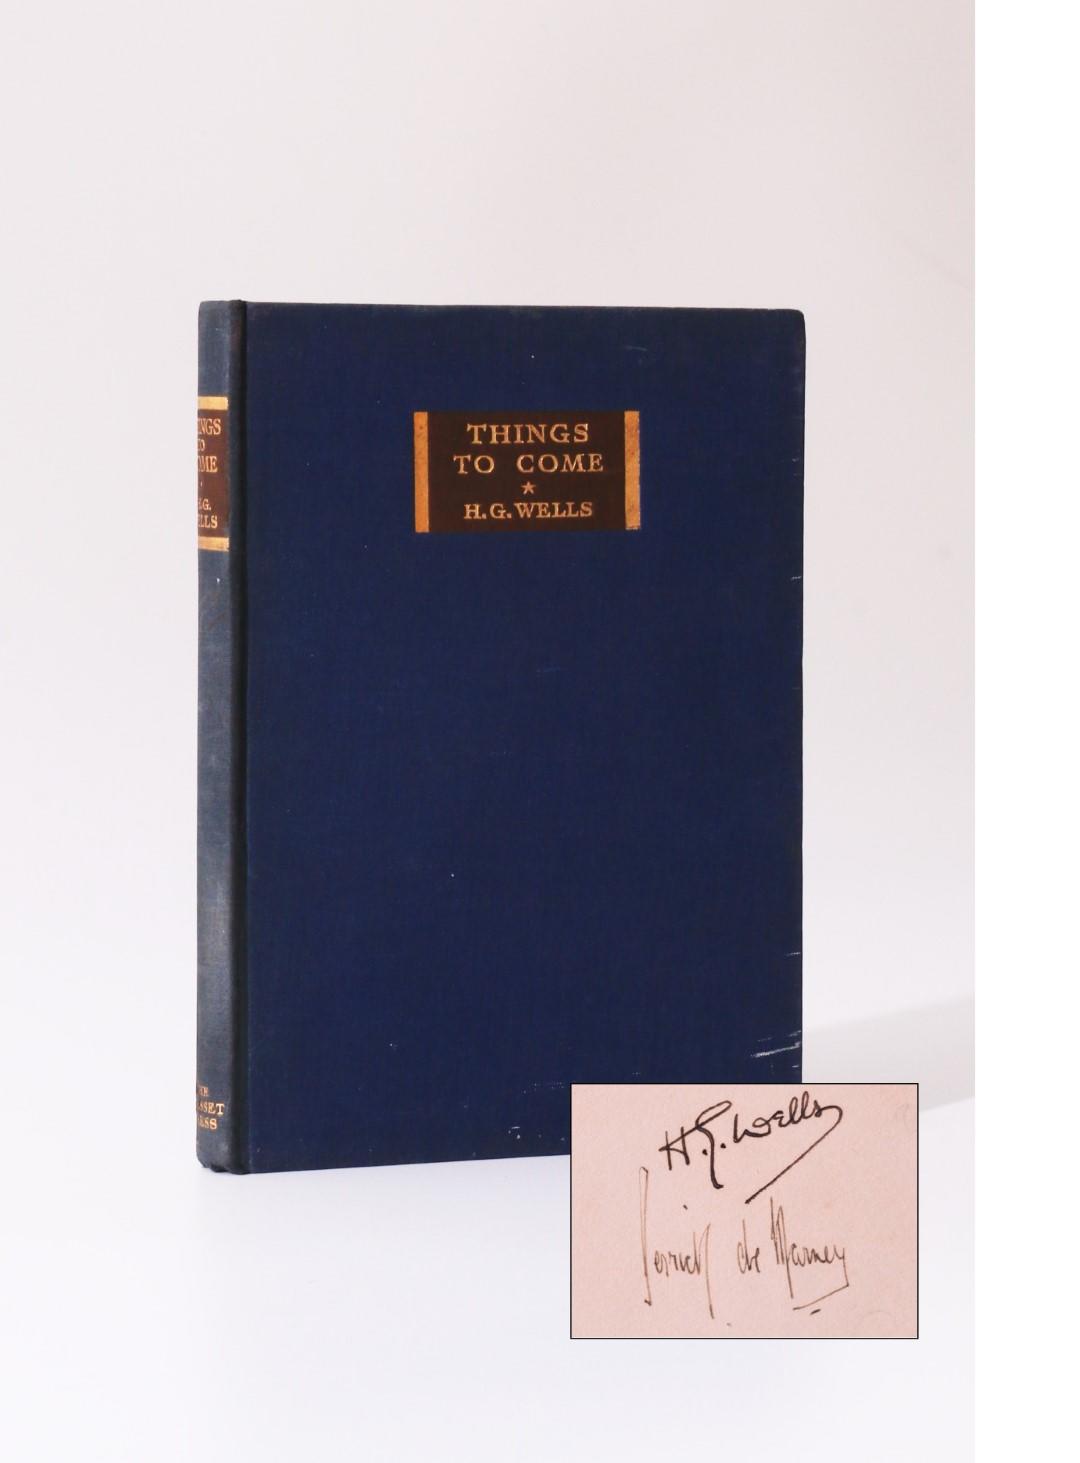 H.G. Wells - Things to Come - Cresset Press, 1935, Signed First Edition.